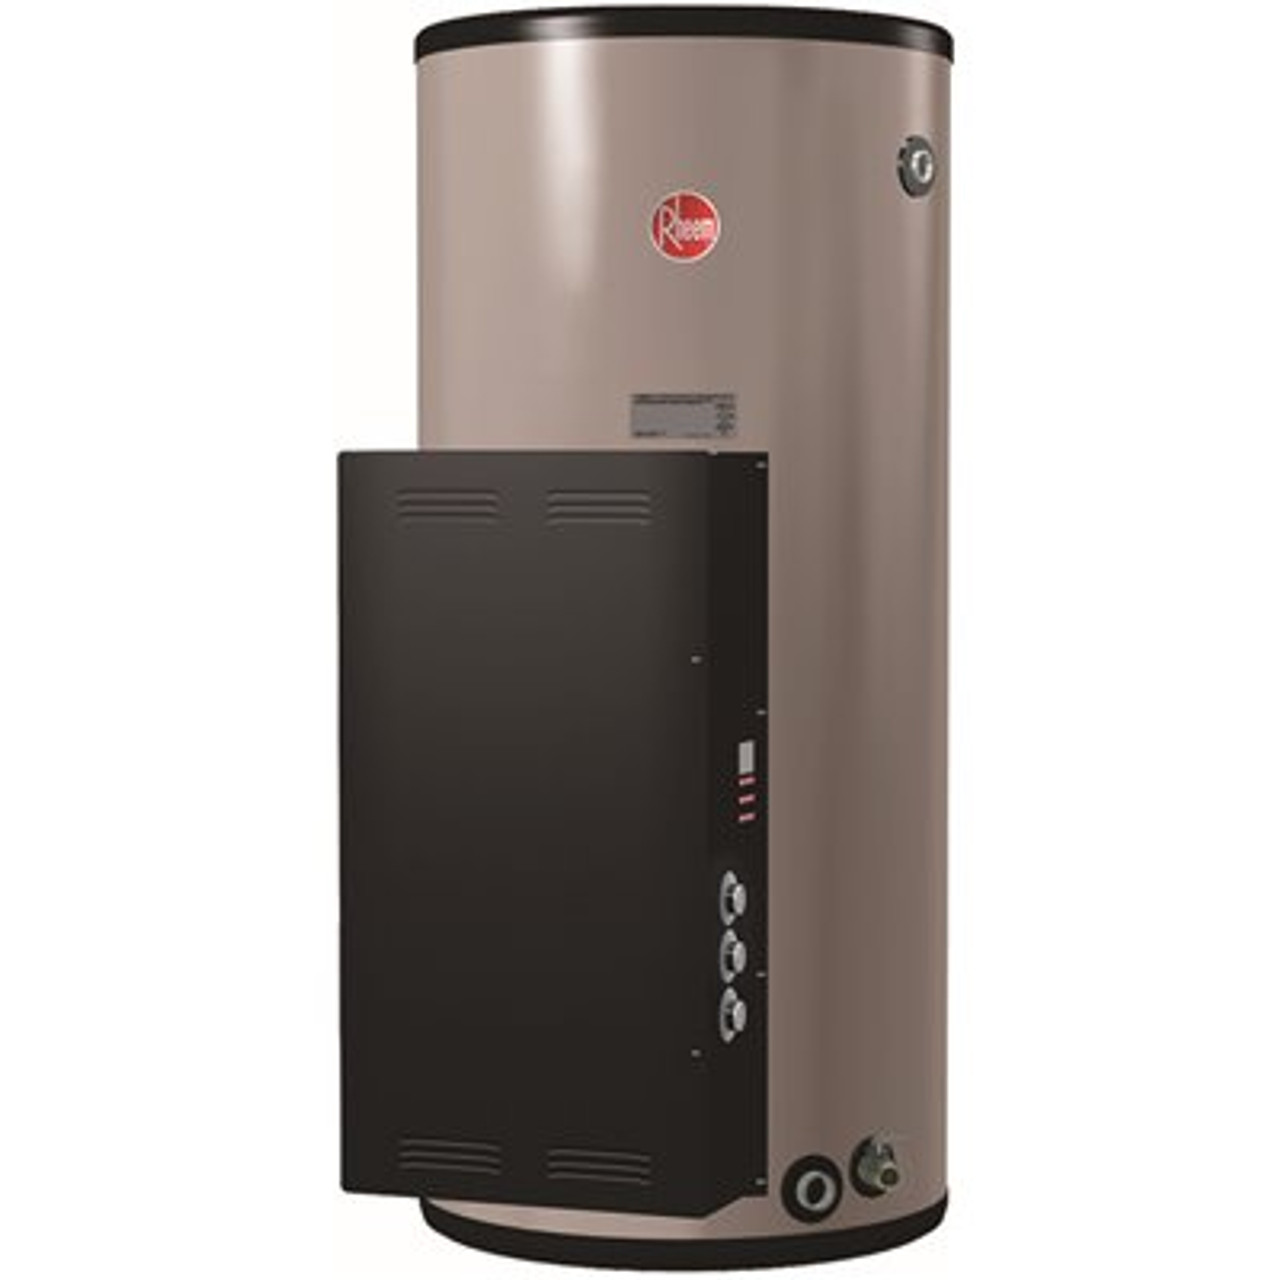 Rheem Heavy Duty 120 gal. 480-Volt 36kw 3-Phase Commercial Electric Surface Thermostat Tank Water Heater